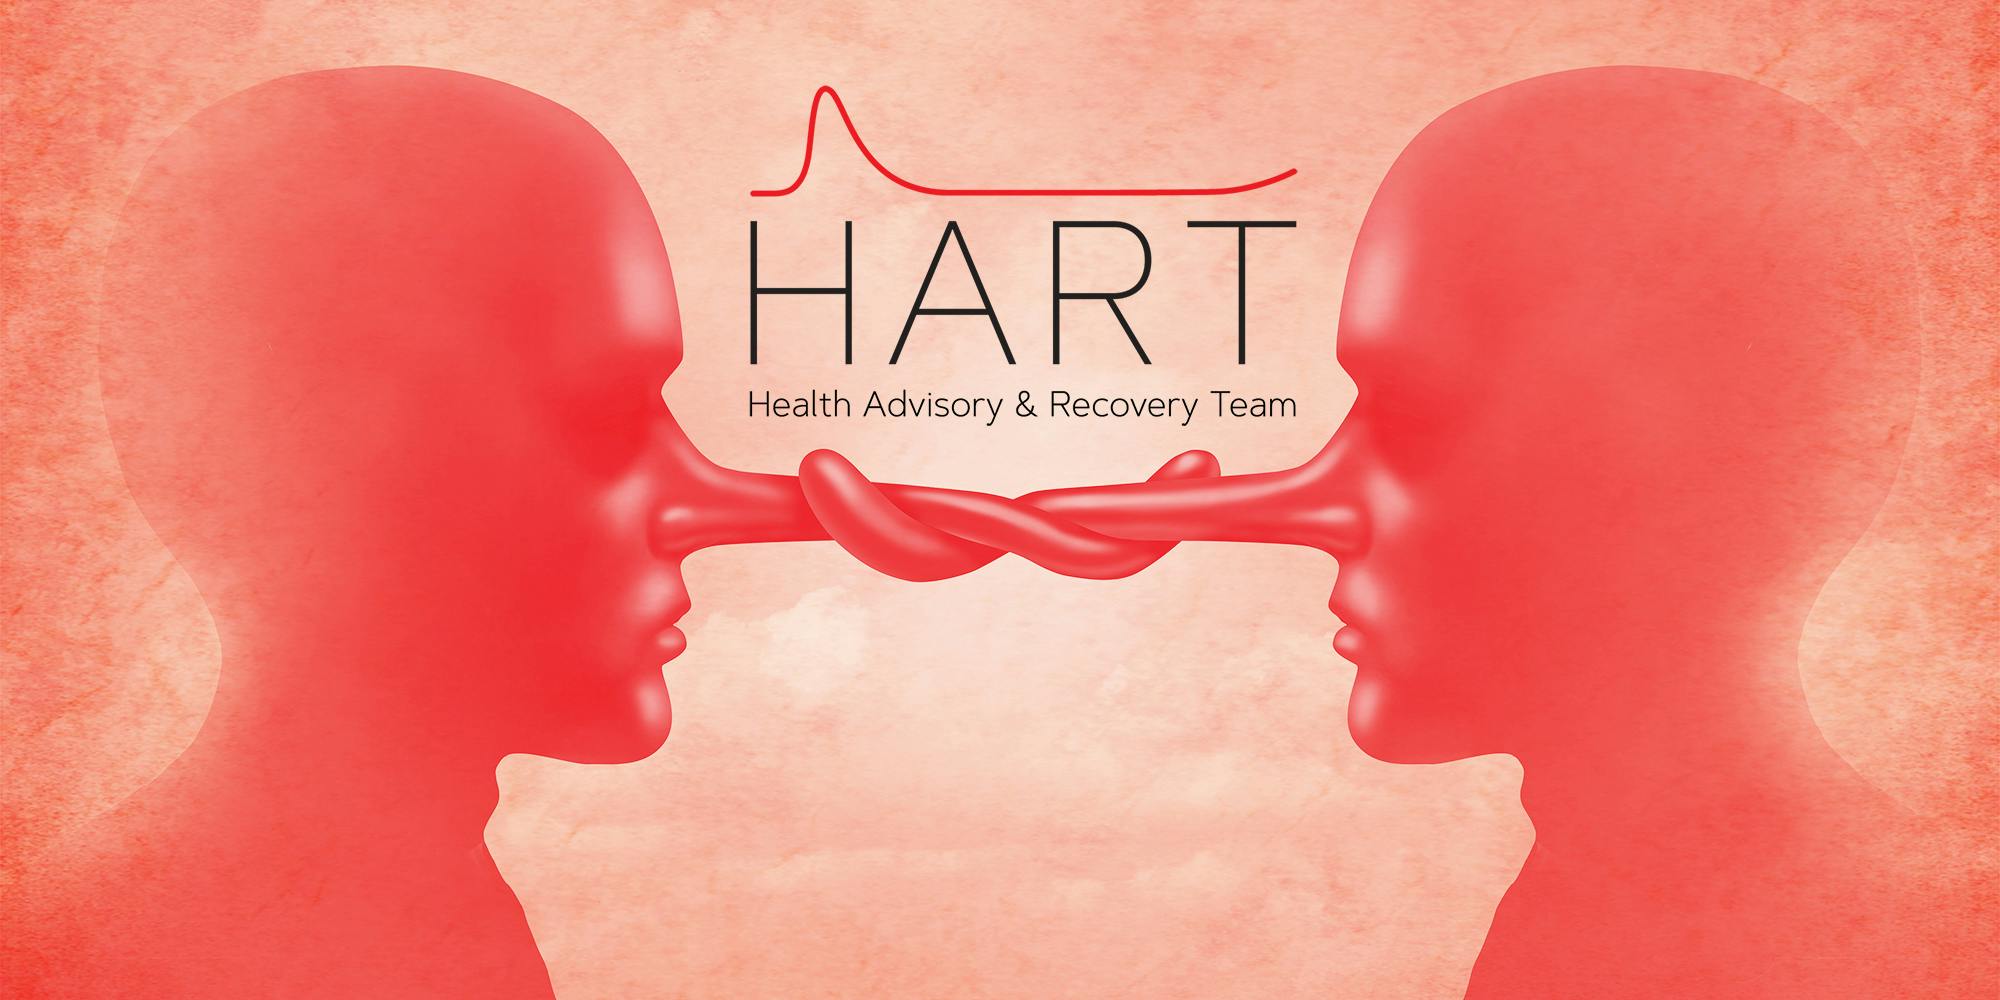 Two people with long noses intertwined with HART Health Advisory & Recovery Team logo